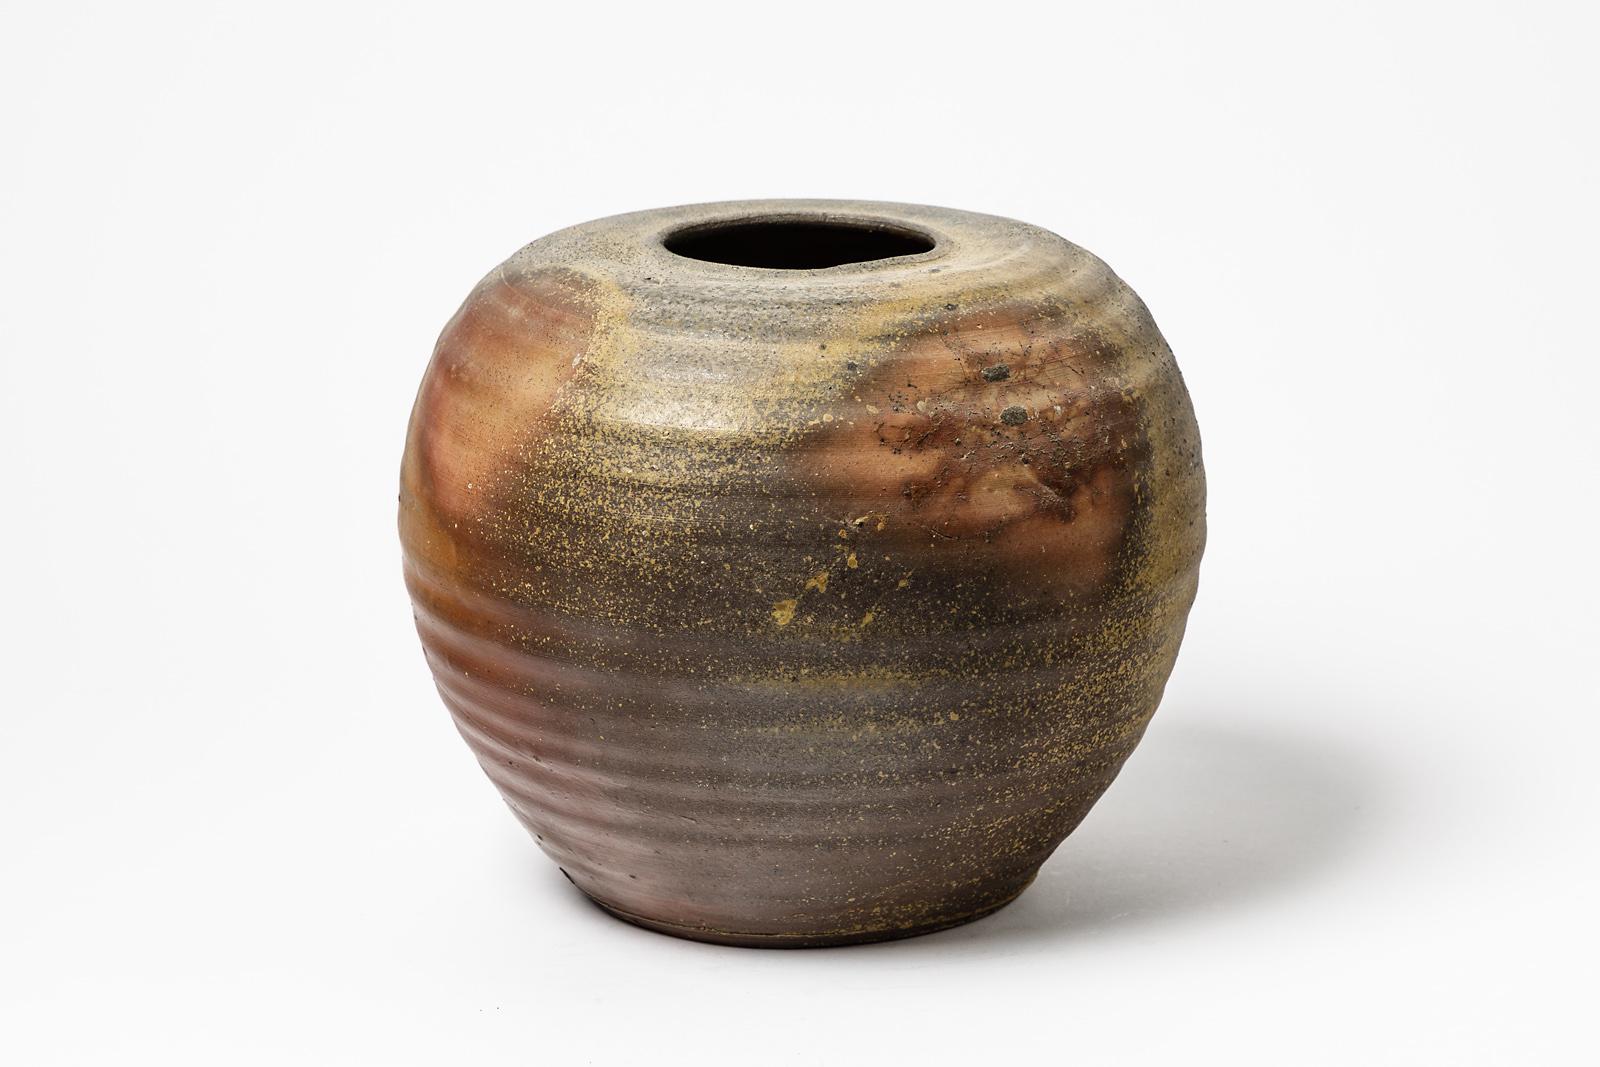 Hervé Rousseau

Large stoneware ceramic vase by the French artiste in Boisbelle, near La Borne.

Original anagama woodfire kiln ceramic colors

Brown and grey ceramic colors

Signed under the base: BOISBELLE

Original perfect